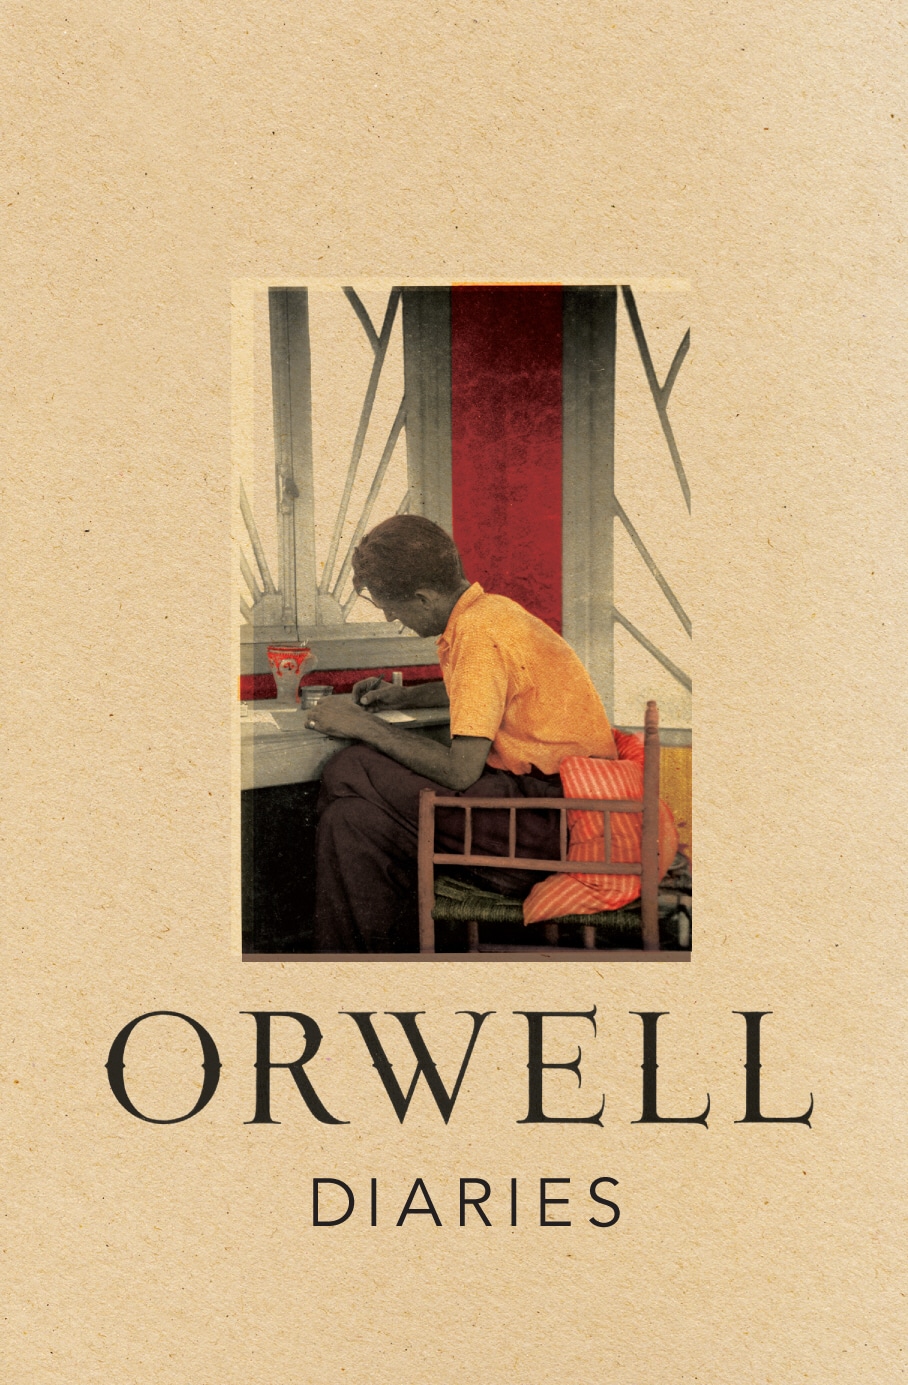 Book “Diaries” by George Orwell — July 23, 2020